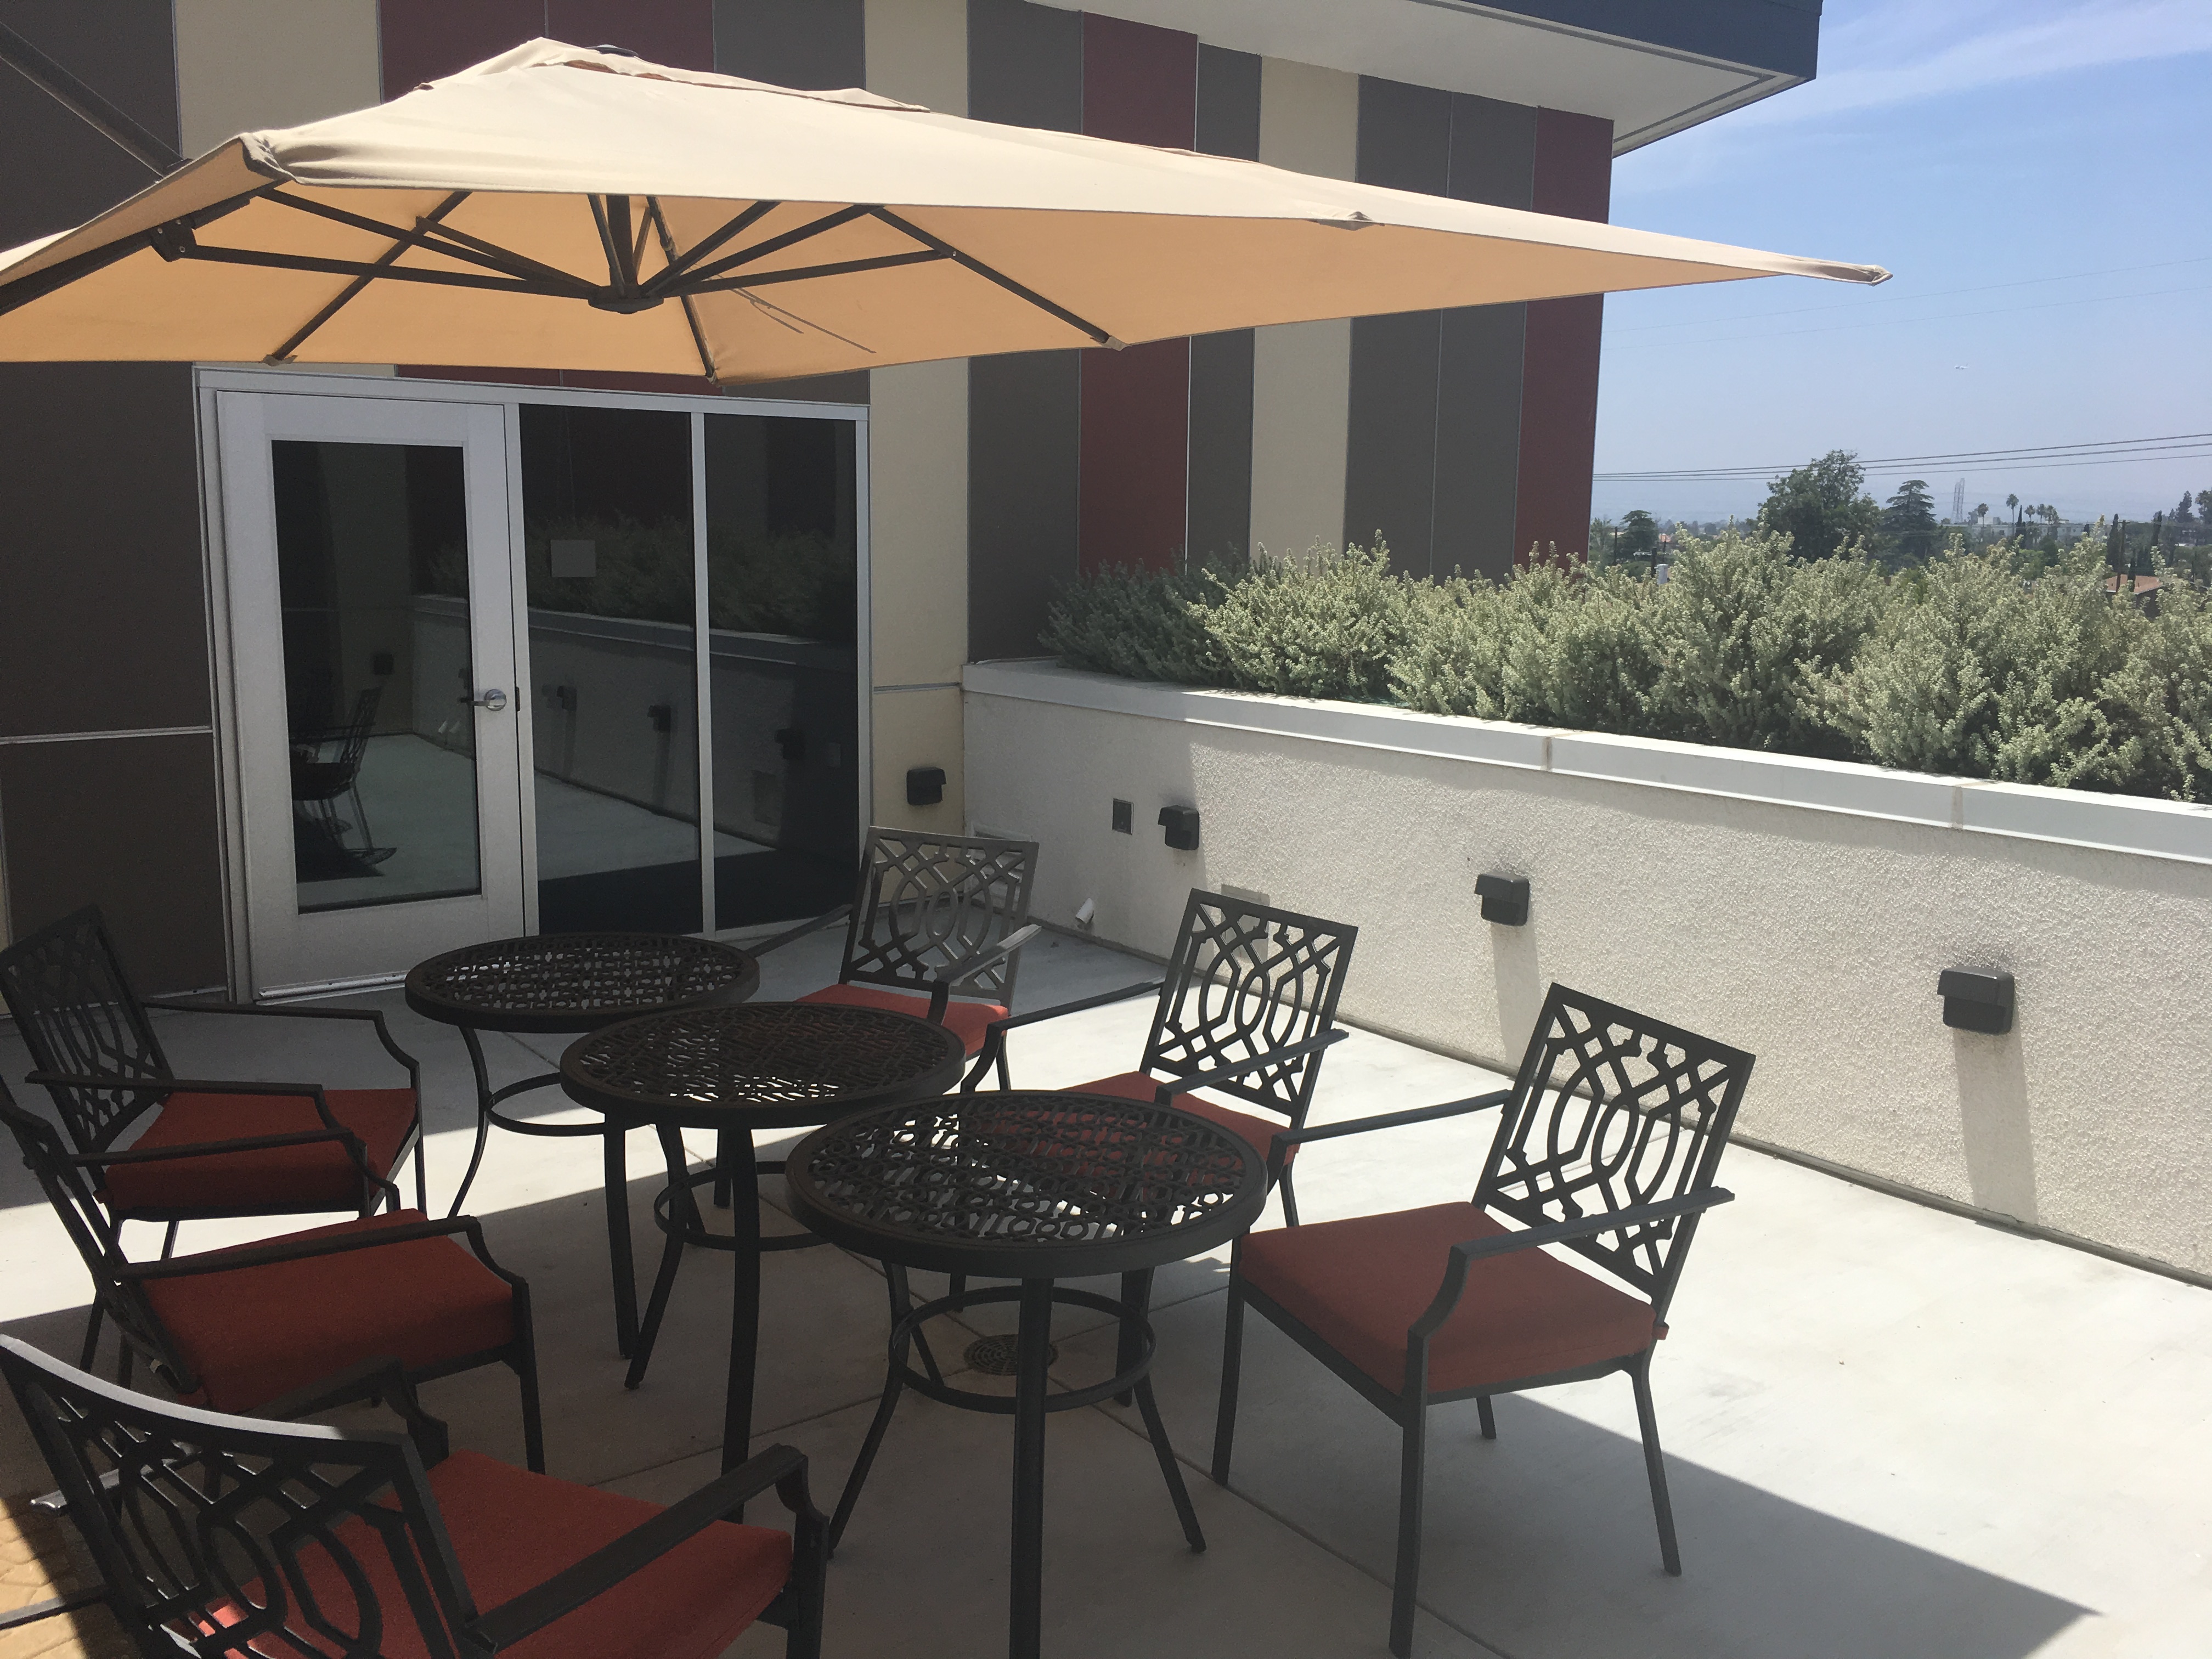 Exterior view of a balcony on the fourt floor in the PSH Campus. Three small round tables with six chairs and large open patio umpbrella.